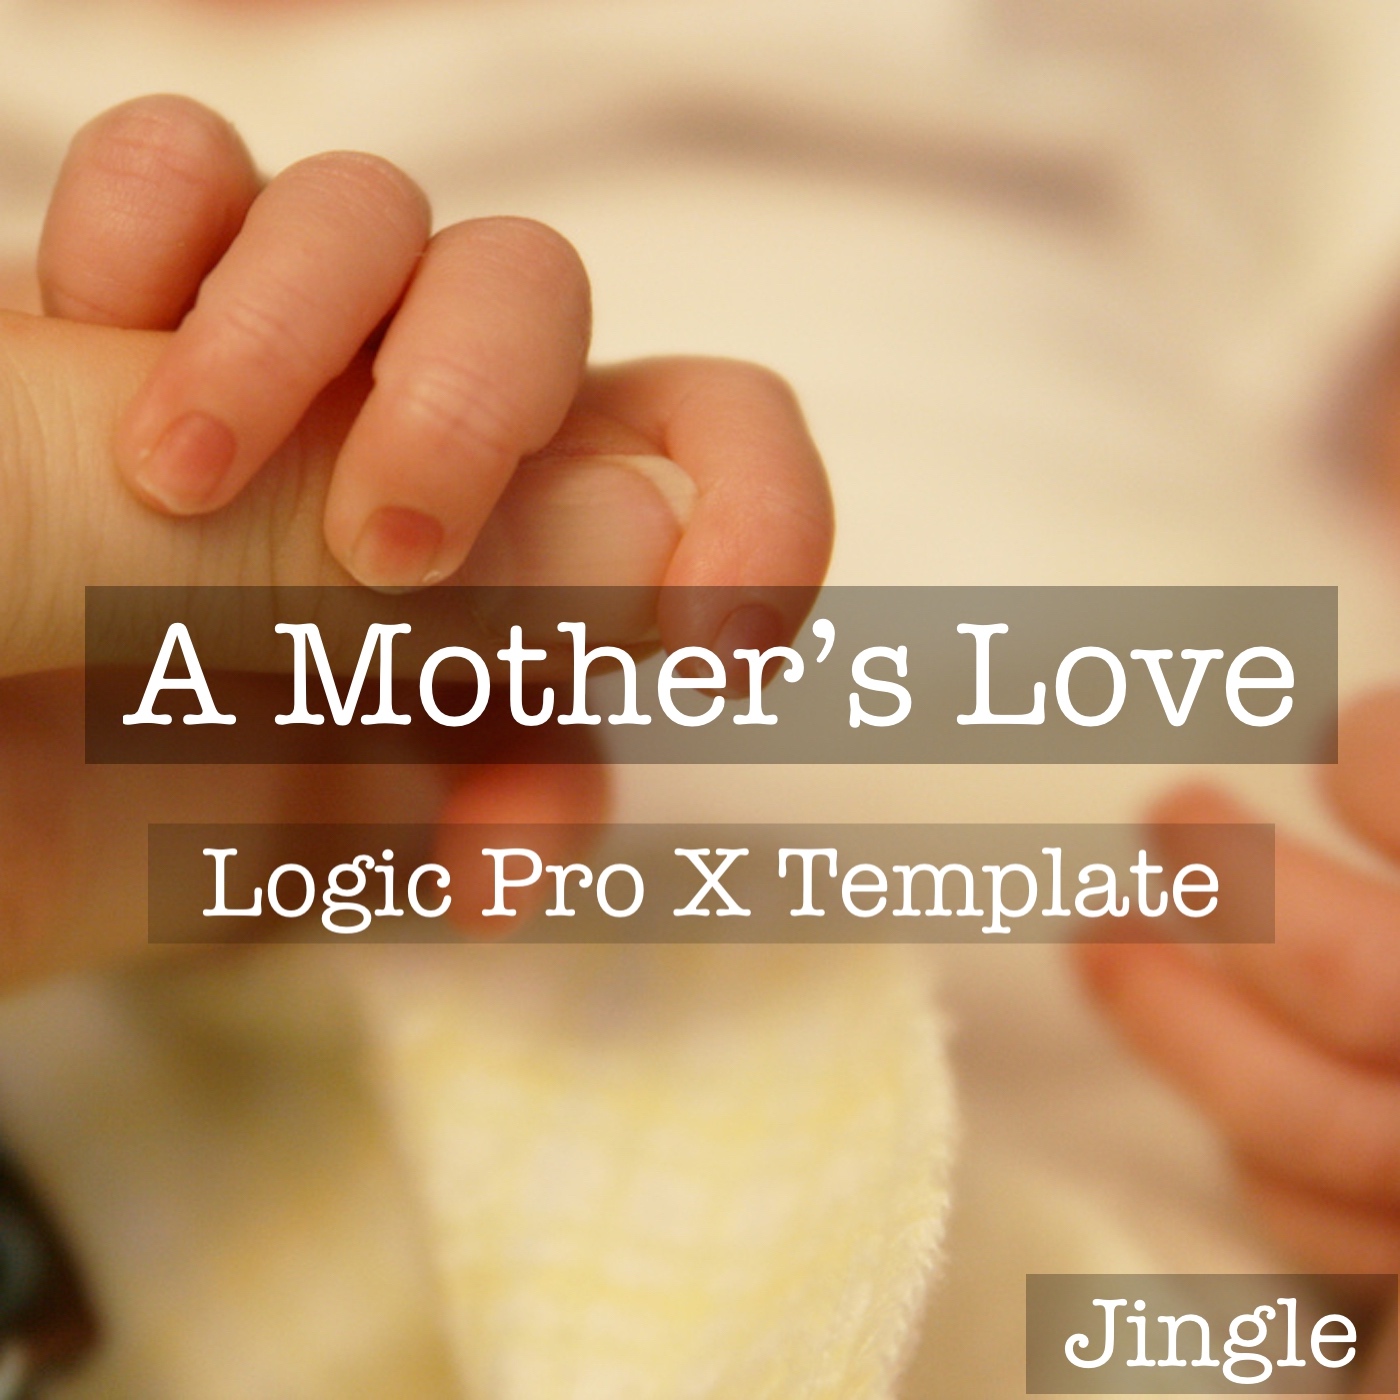 A Mother's Love - Logic Pro X Template